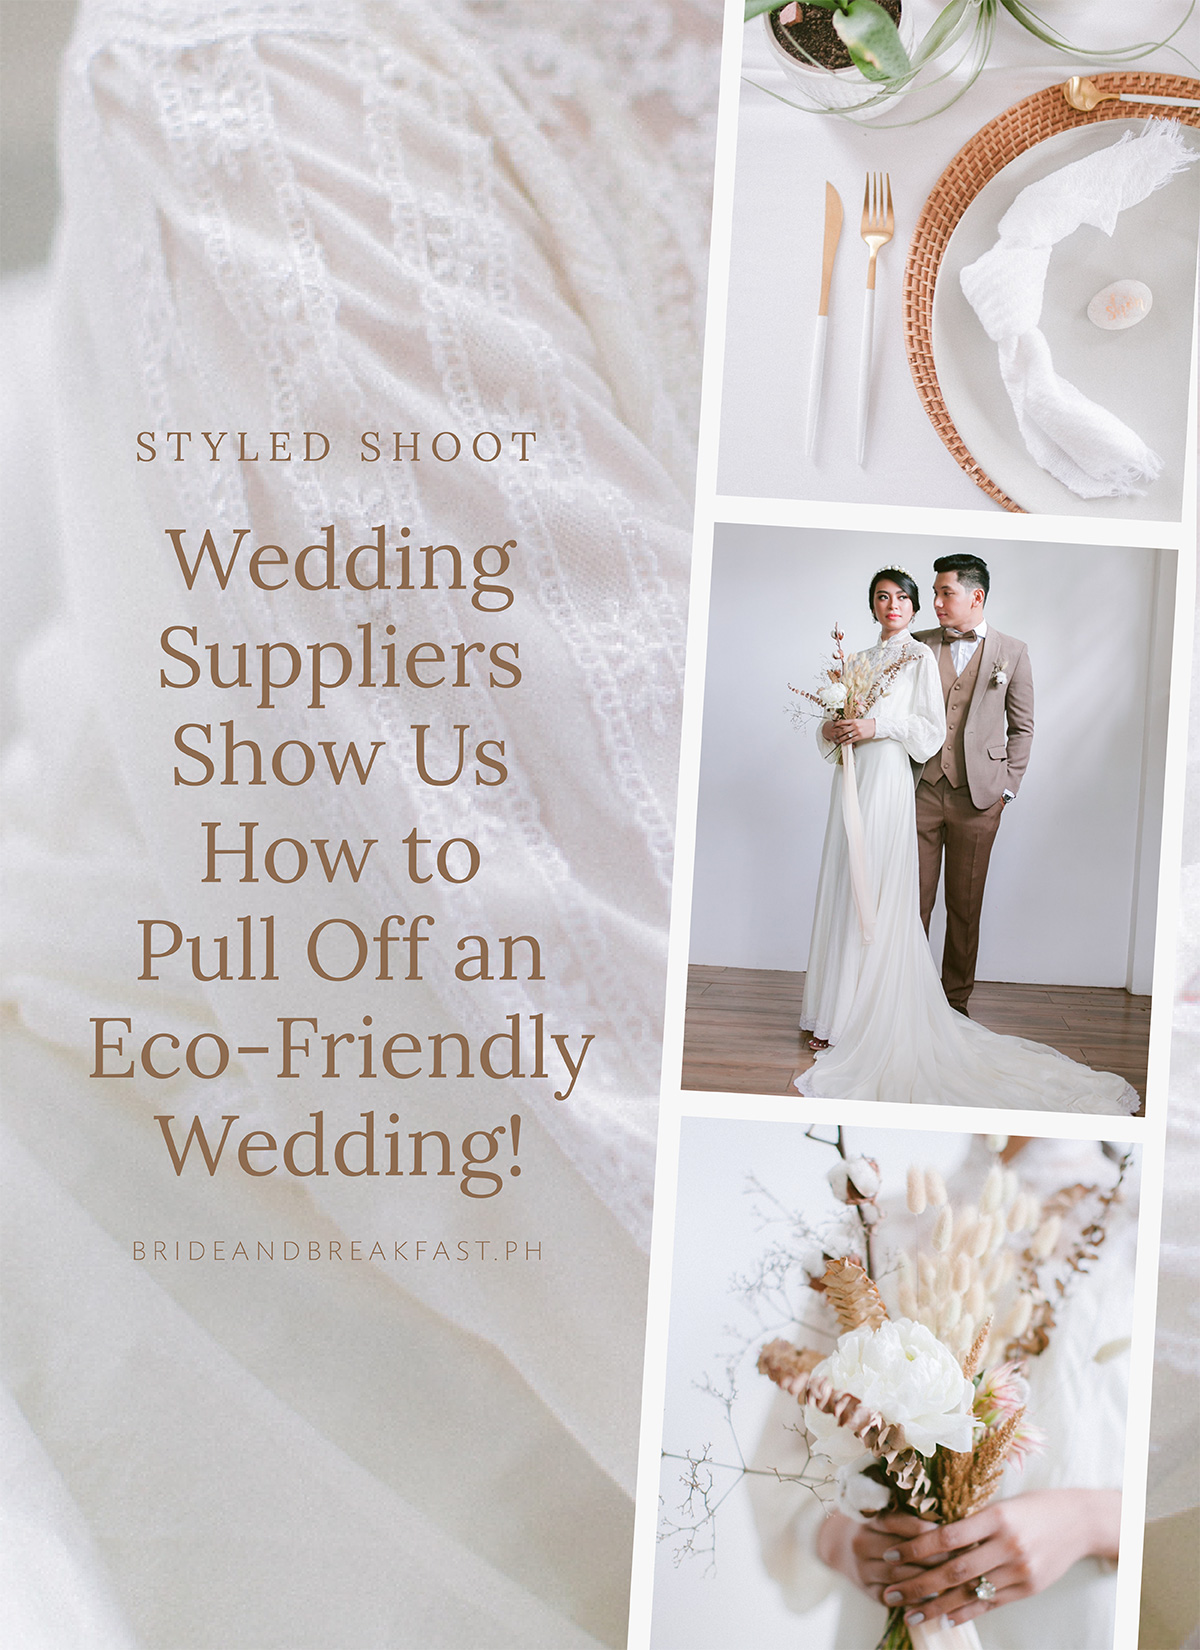 Wedding Suppliers Show Us How to Pull Off an Eco-Friendly Wedding!